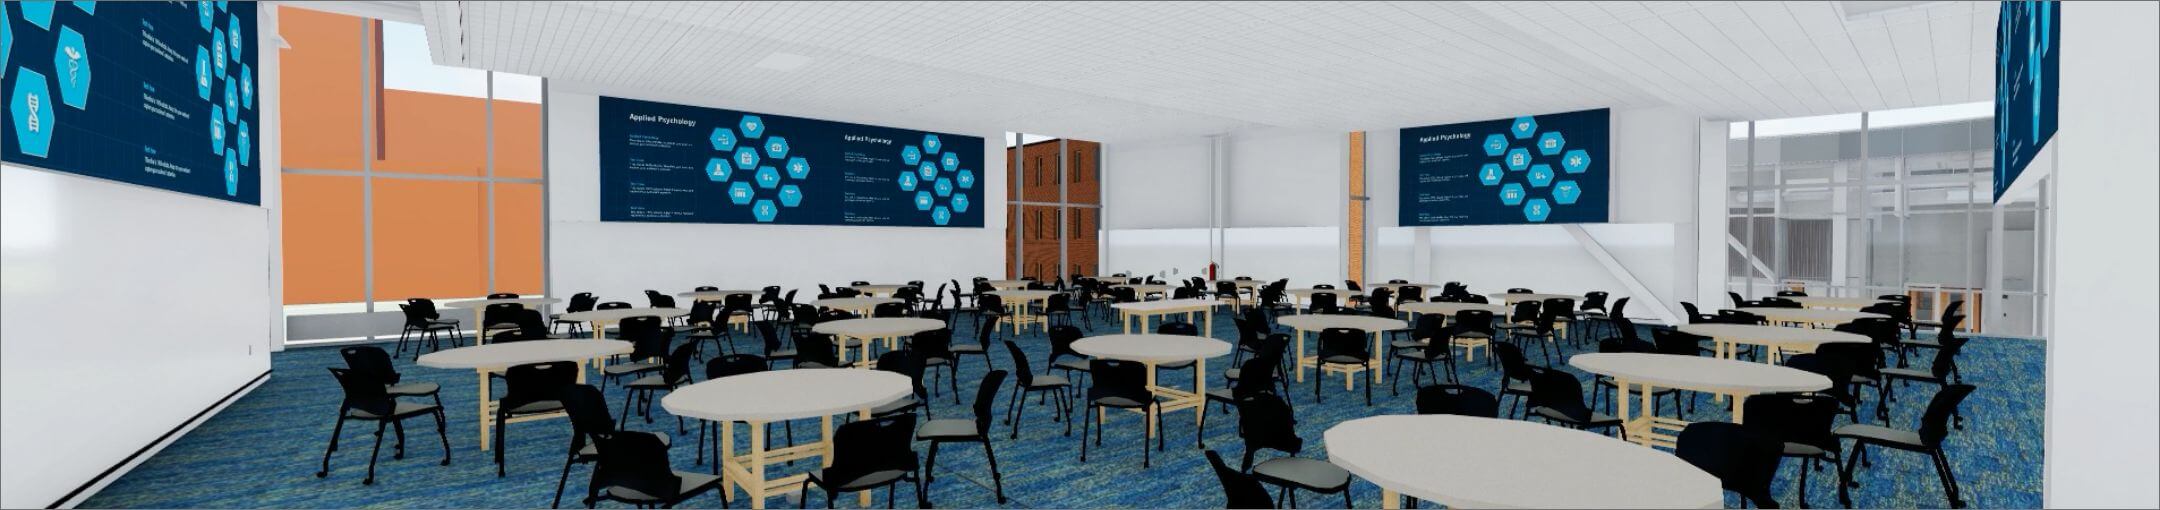 A rendering of the interior of a classroom in The SHED at R I T.